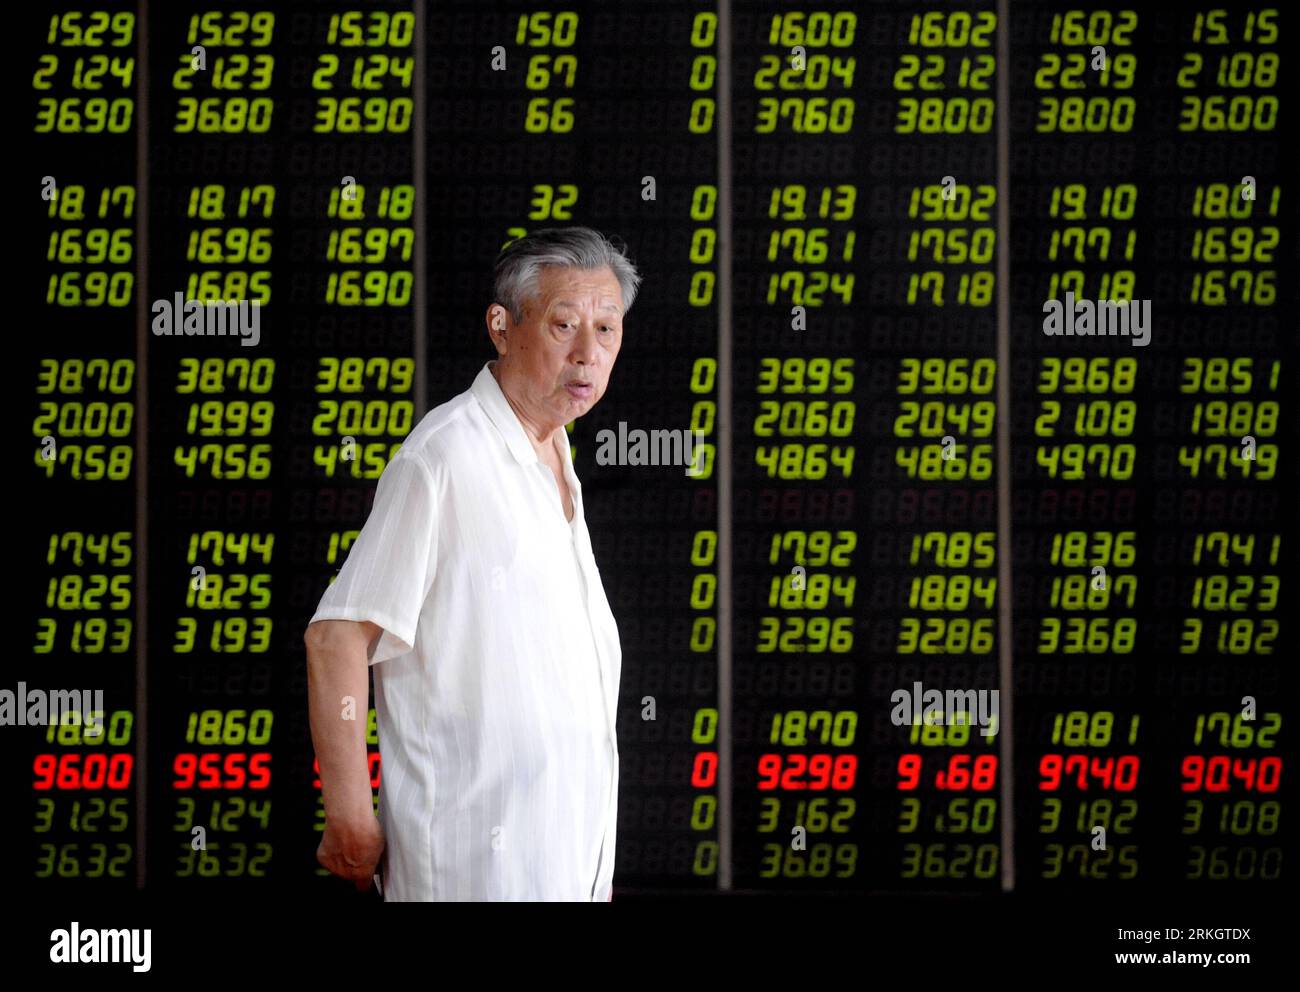 Bildnummer: 55616099  Datum: 25.07.2011  Copyright: imago/Xinhua (110725) -- SHENYANG, July 25, 2011 (Xinhua) -- An investor walks past an electronic panel in a stock exchange in Shenyang City, northeast China s Liaoning Province, July 25, 2011. Chinese shares tumbled on Monday, the first trading day following a deadly train collision in east China s Zhejiang Province, which left at least 39 dead and 192 others injured. The benchmark Shanghai Composite Index dropped 2.96 percent to close at 2,688.75. And the Shenzhen Component Index lost 3.13 percent to finish at 11,966.24. (Xinhua/Zhang Wenku Stock Photo